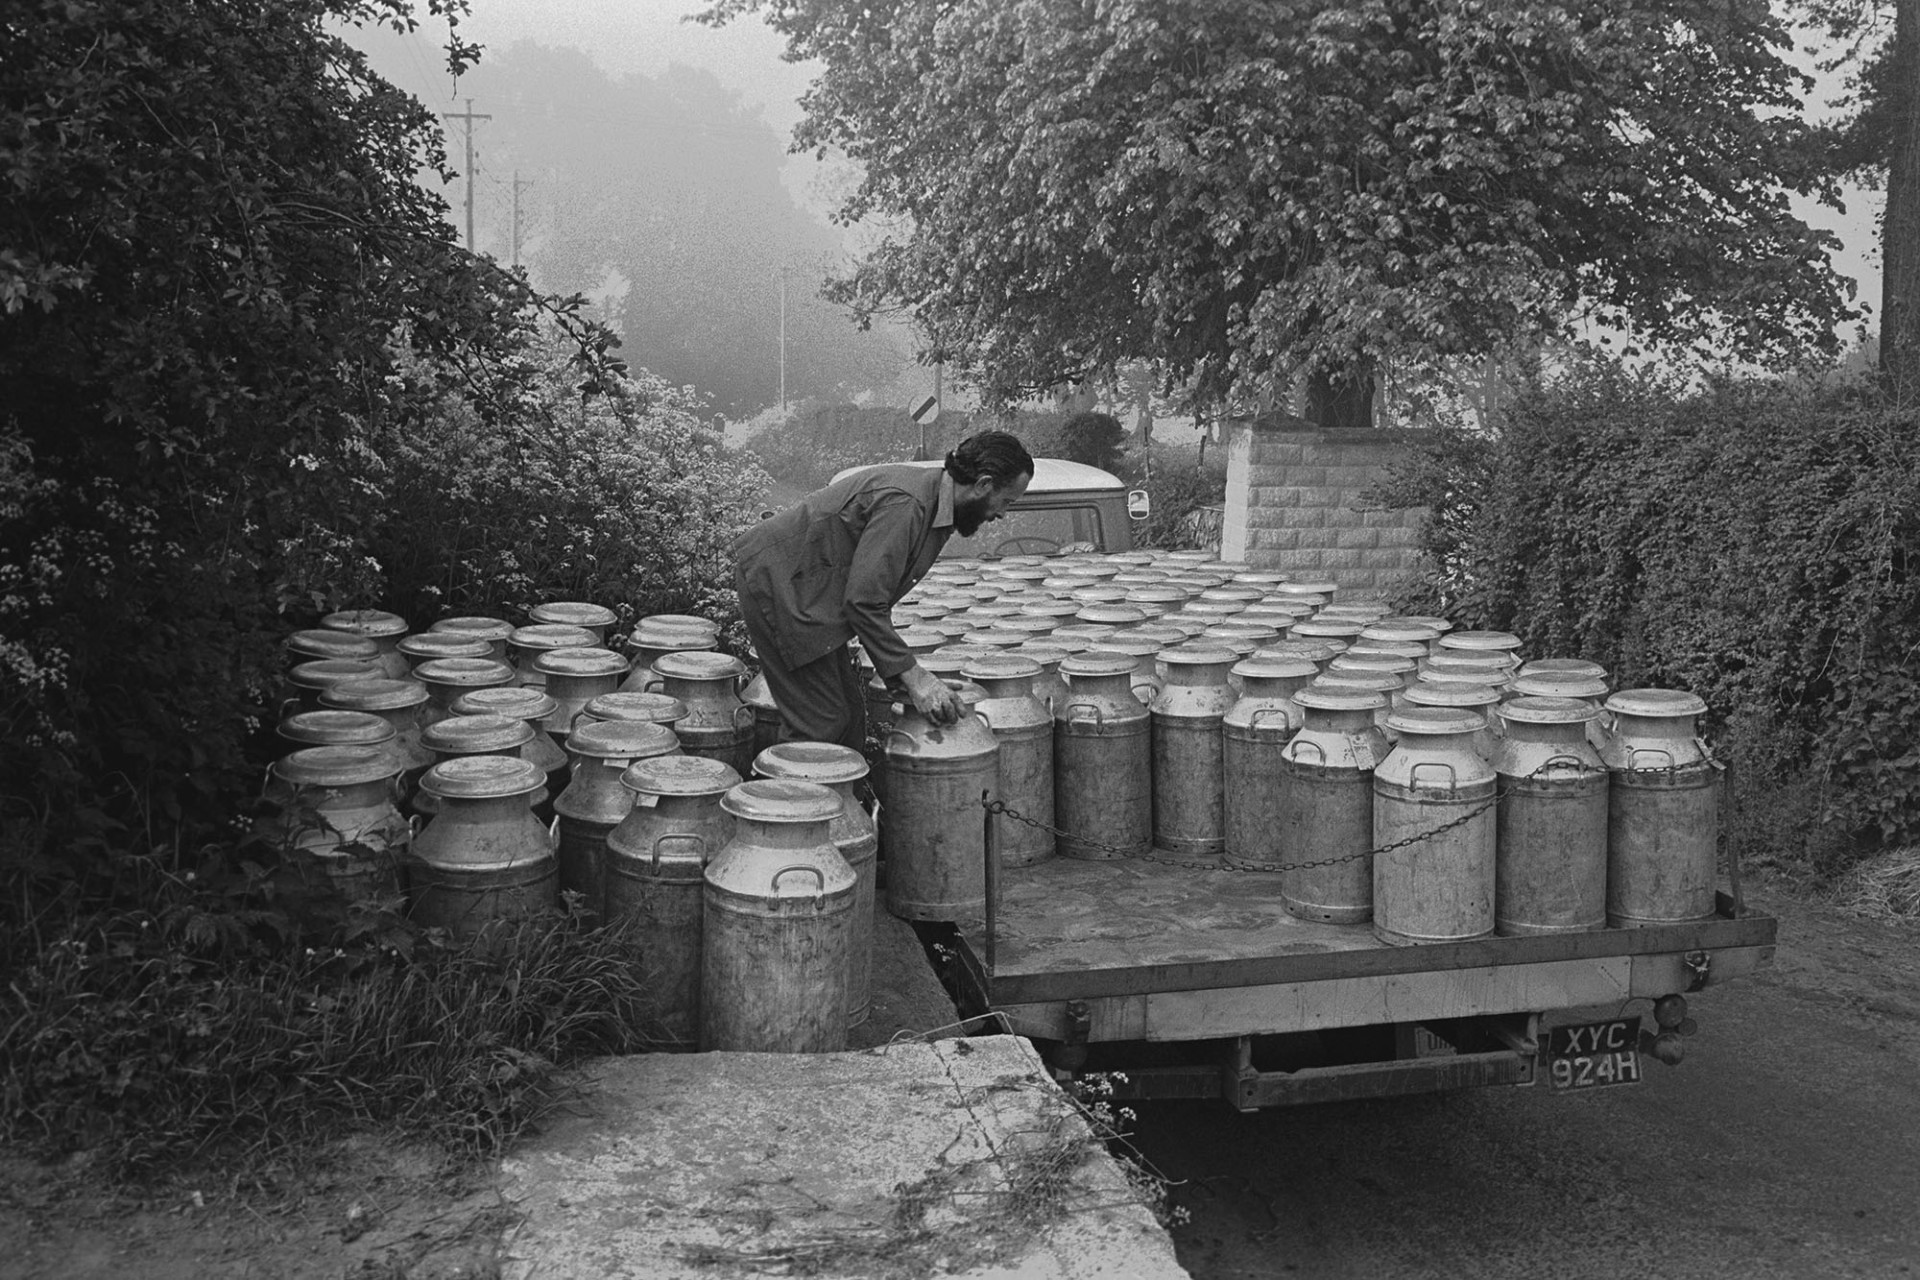 Man loading lorry with milk churns on to lorry from stand. 
[Fred Hooper, a milk lorry driver, loading milk churns onto his lorry from a stand in Sheepwash.]